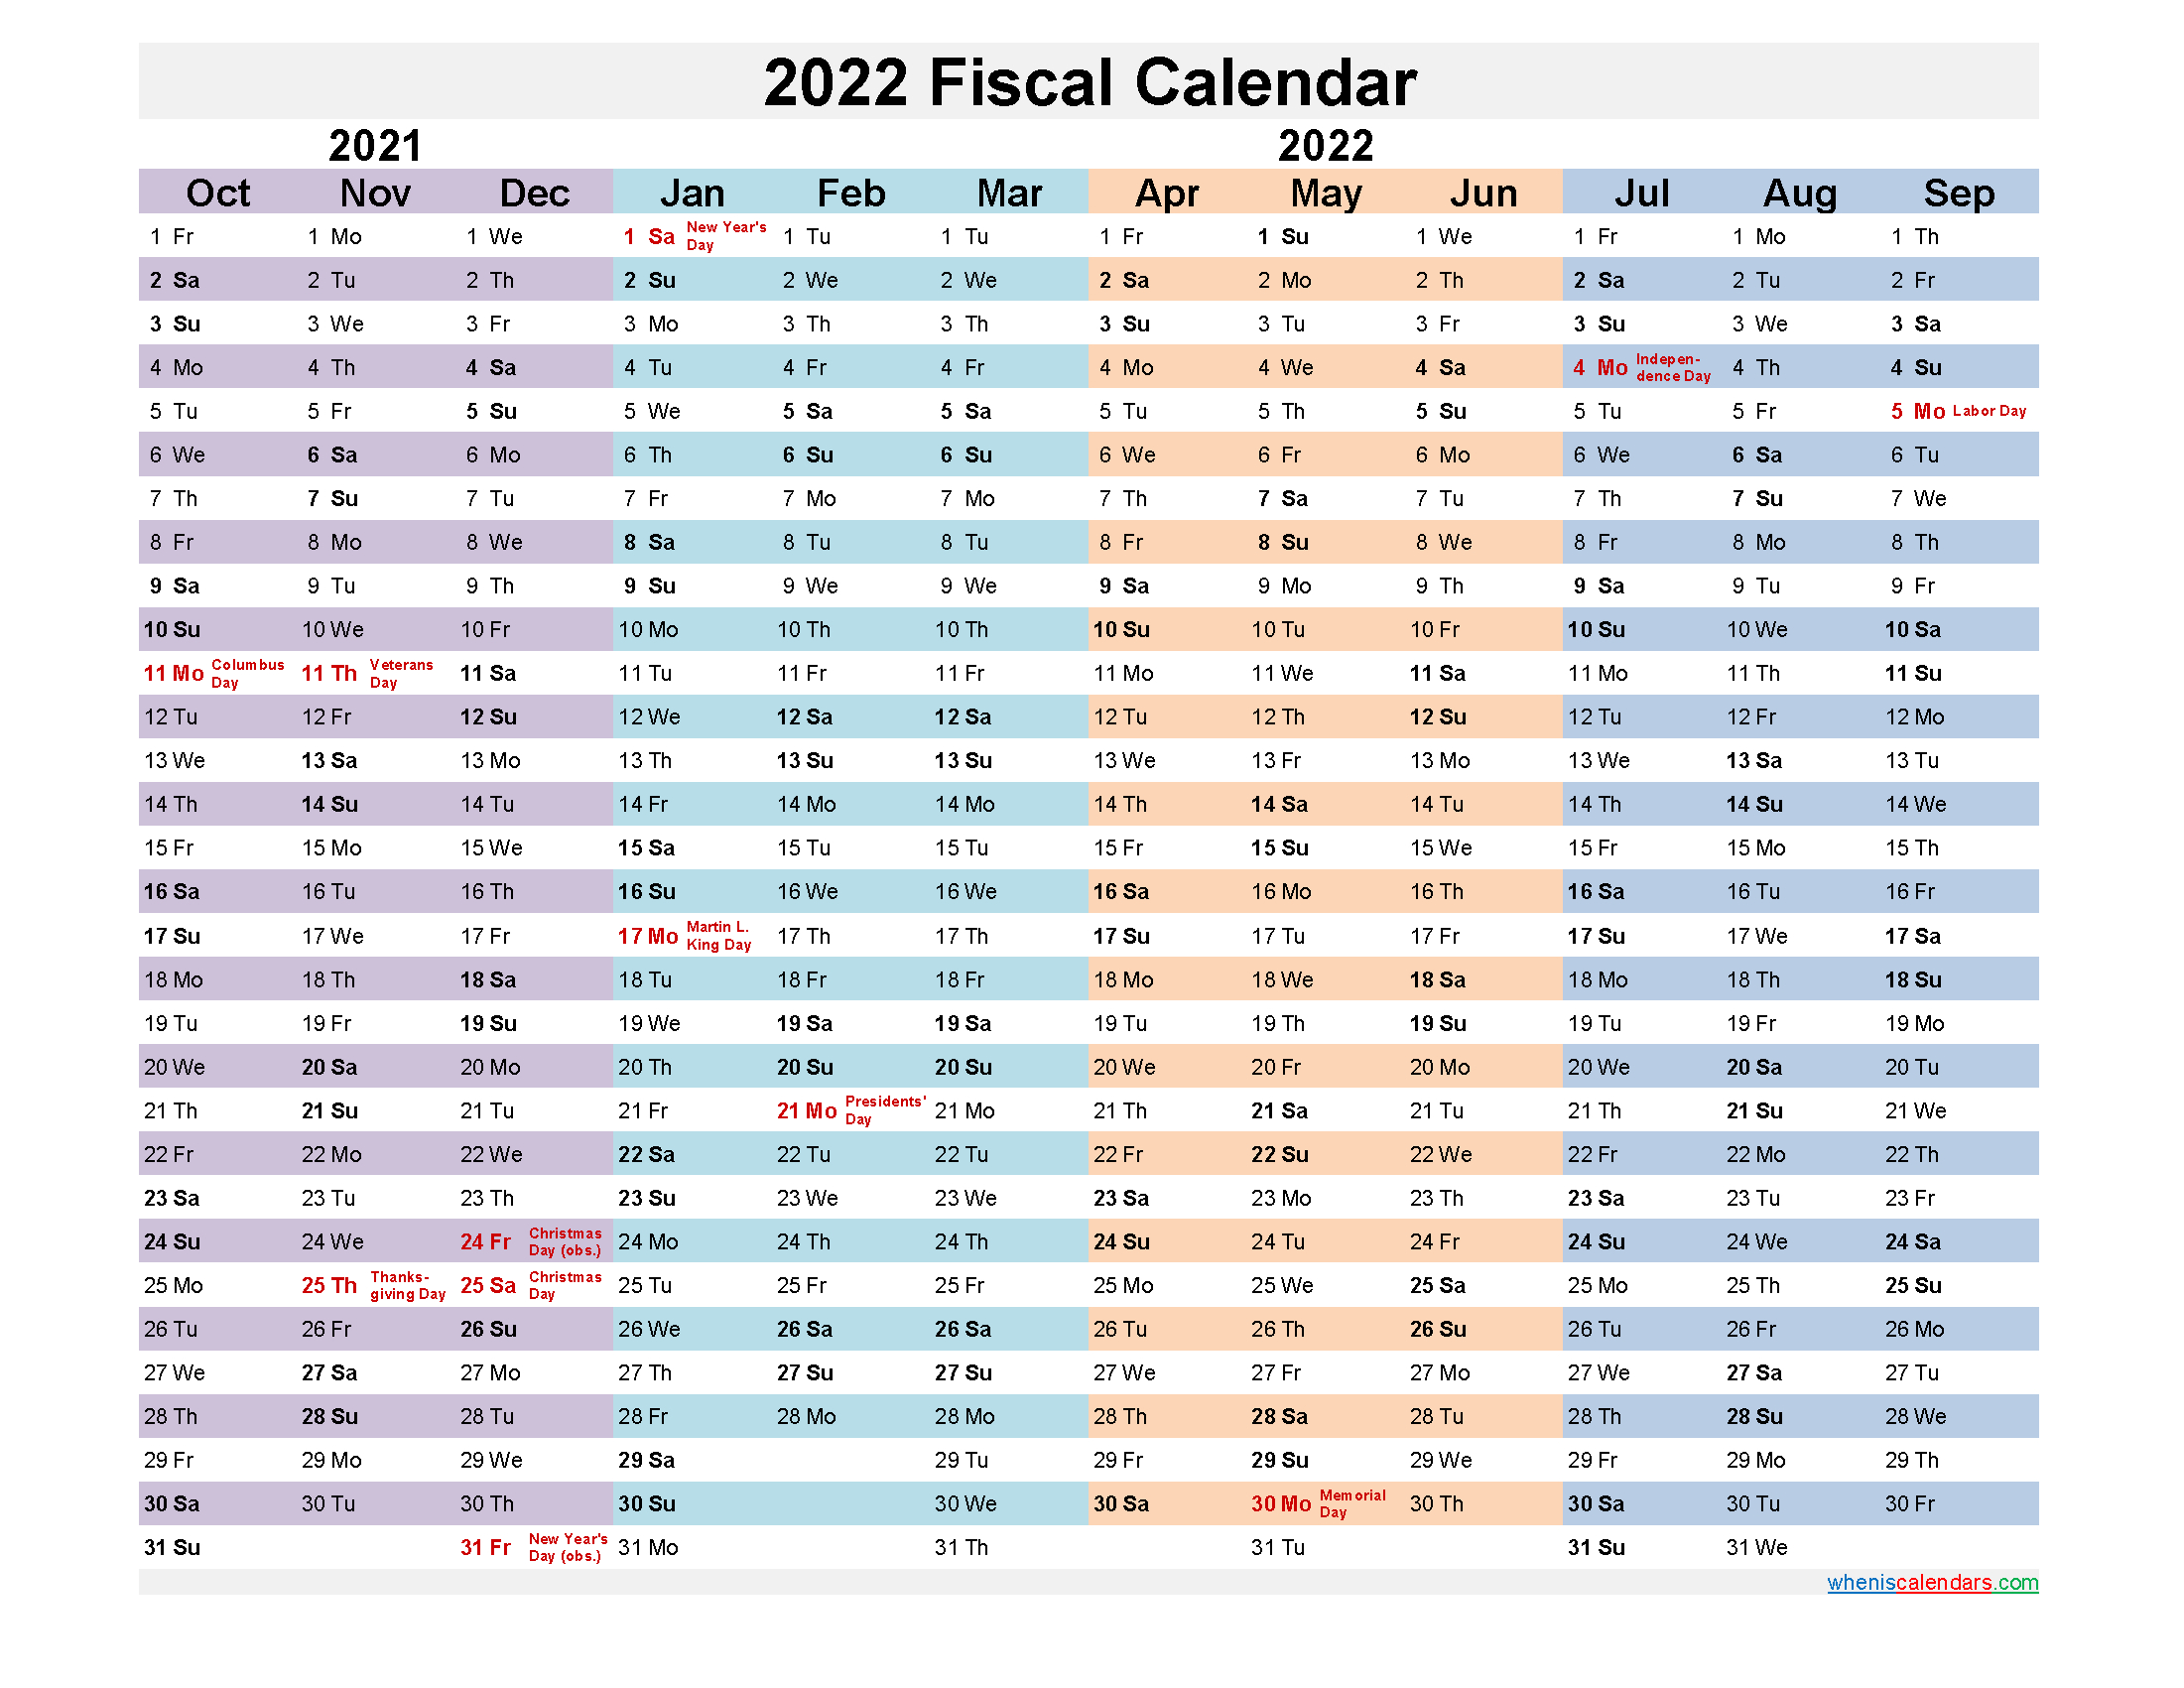 2022 Fiscal Calendar Template No.fiscal22Y26 pertaining to Federal Government Calendar 2022 Printable